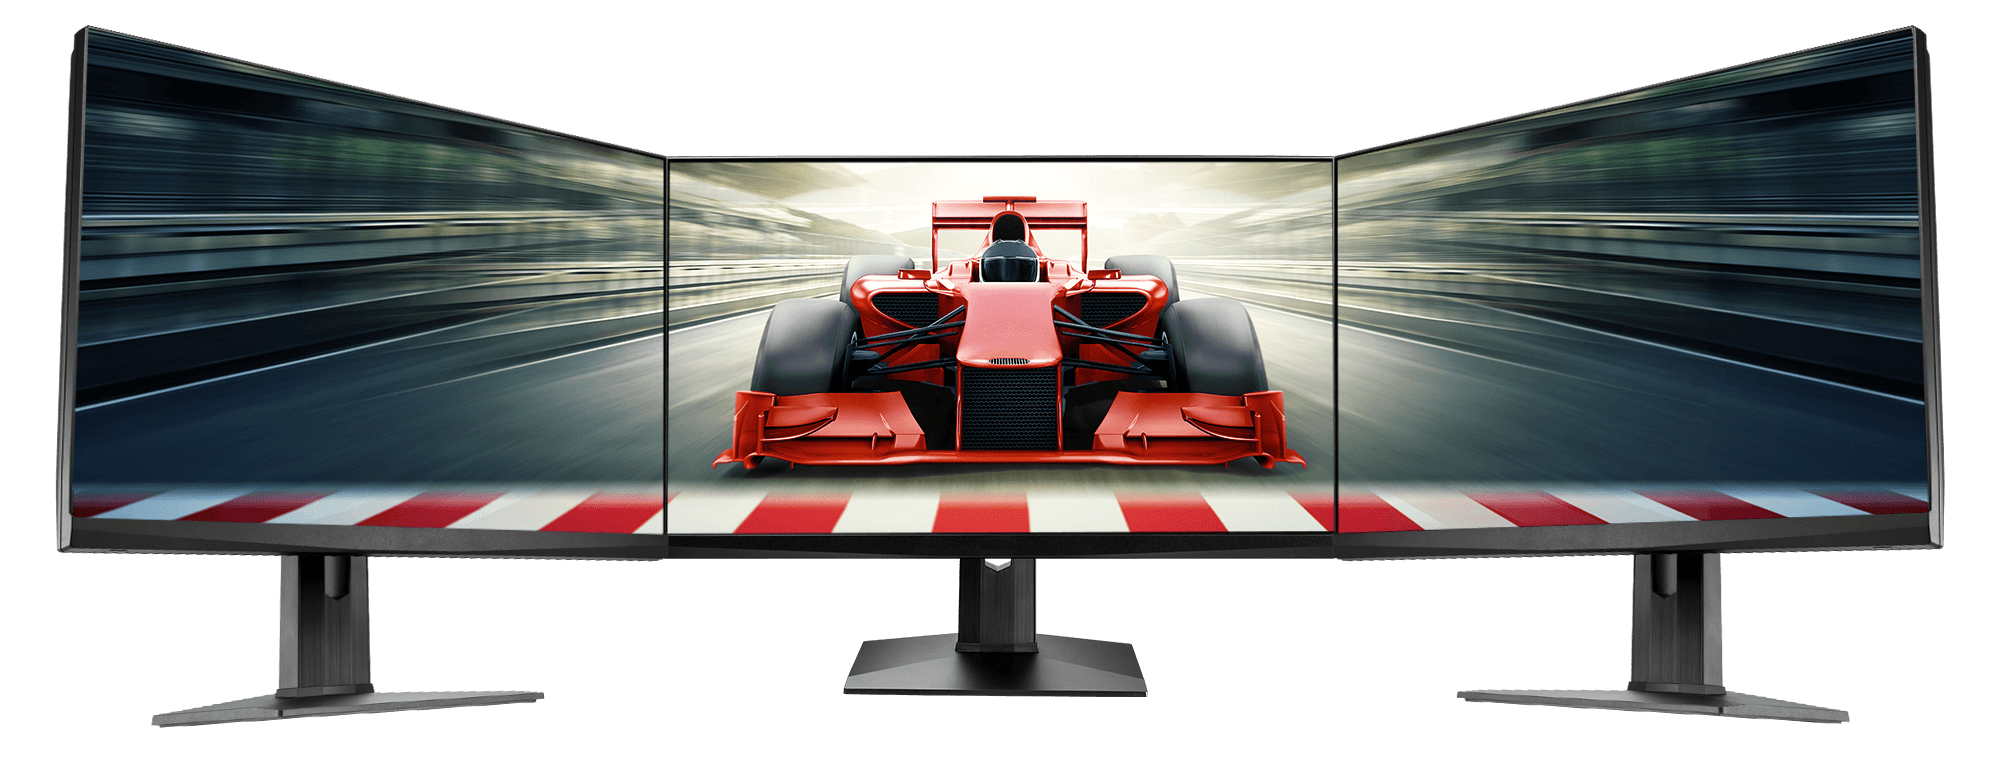 three monitors link together and a racing car image crossing them